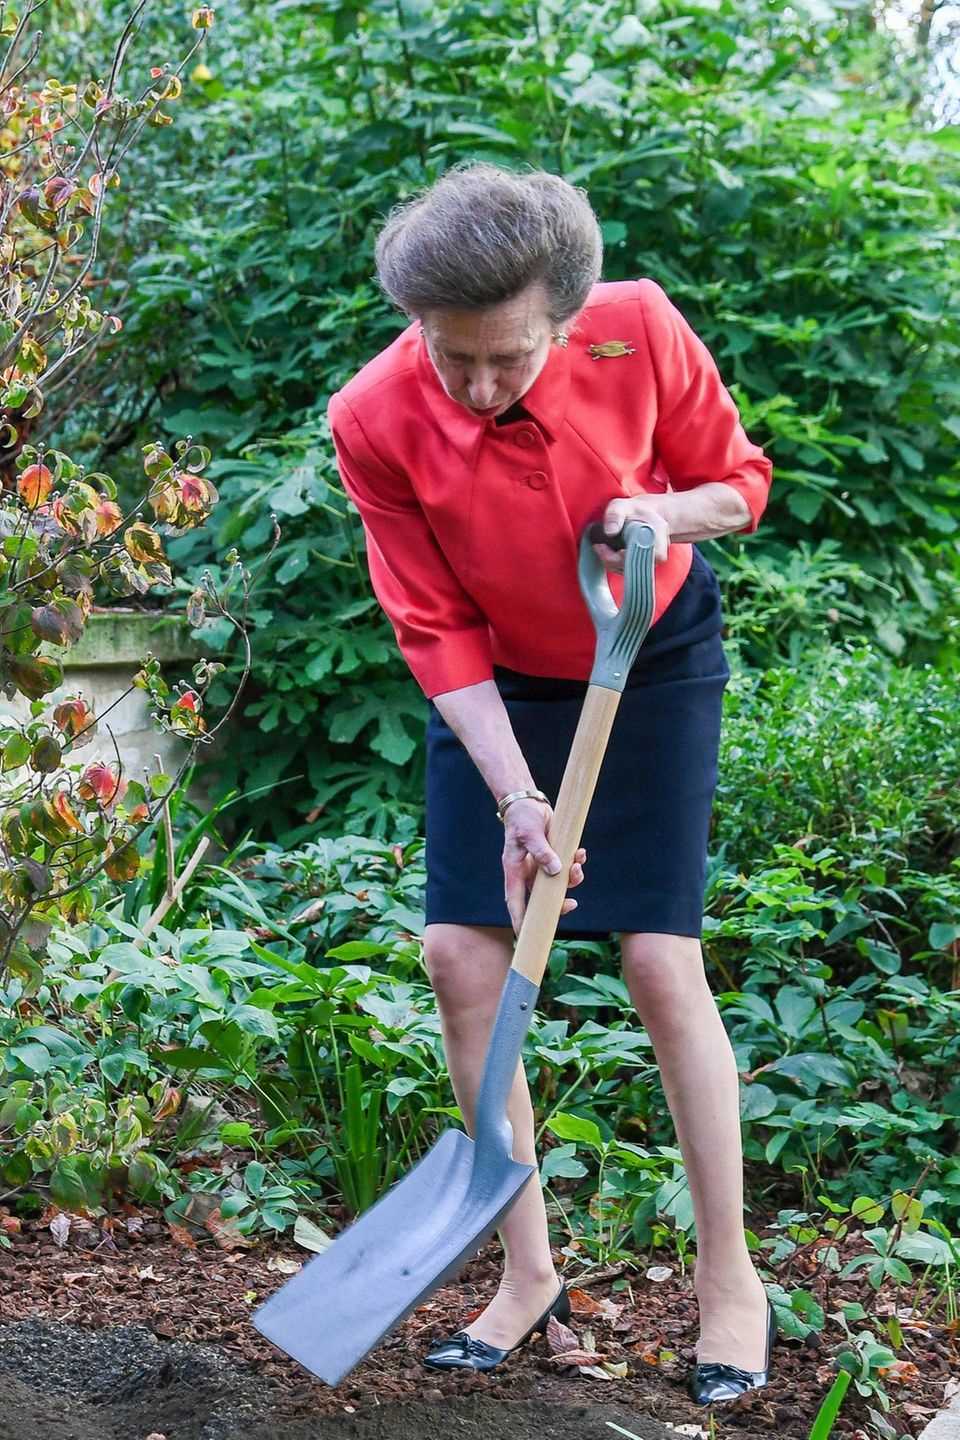 Princess Anne is in costume with a shovel in the garden.